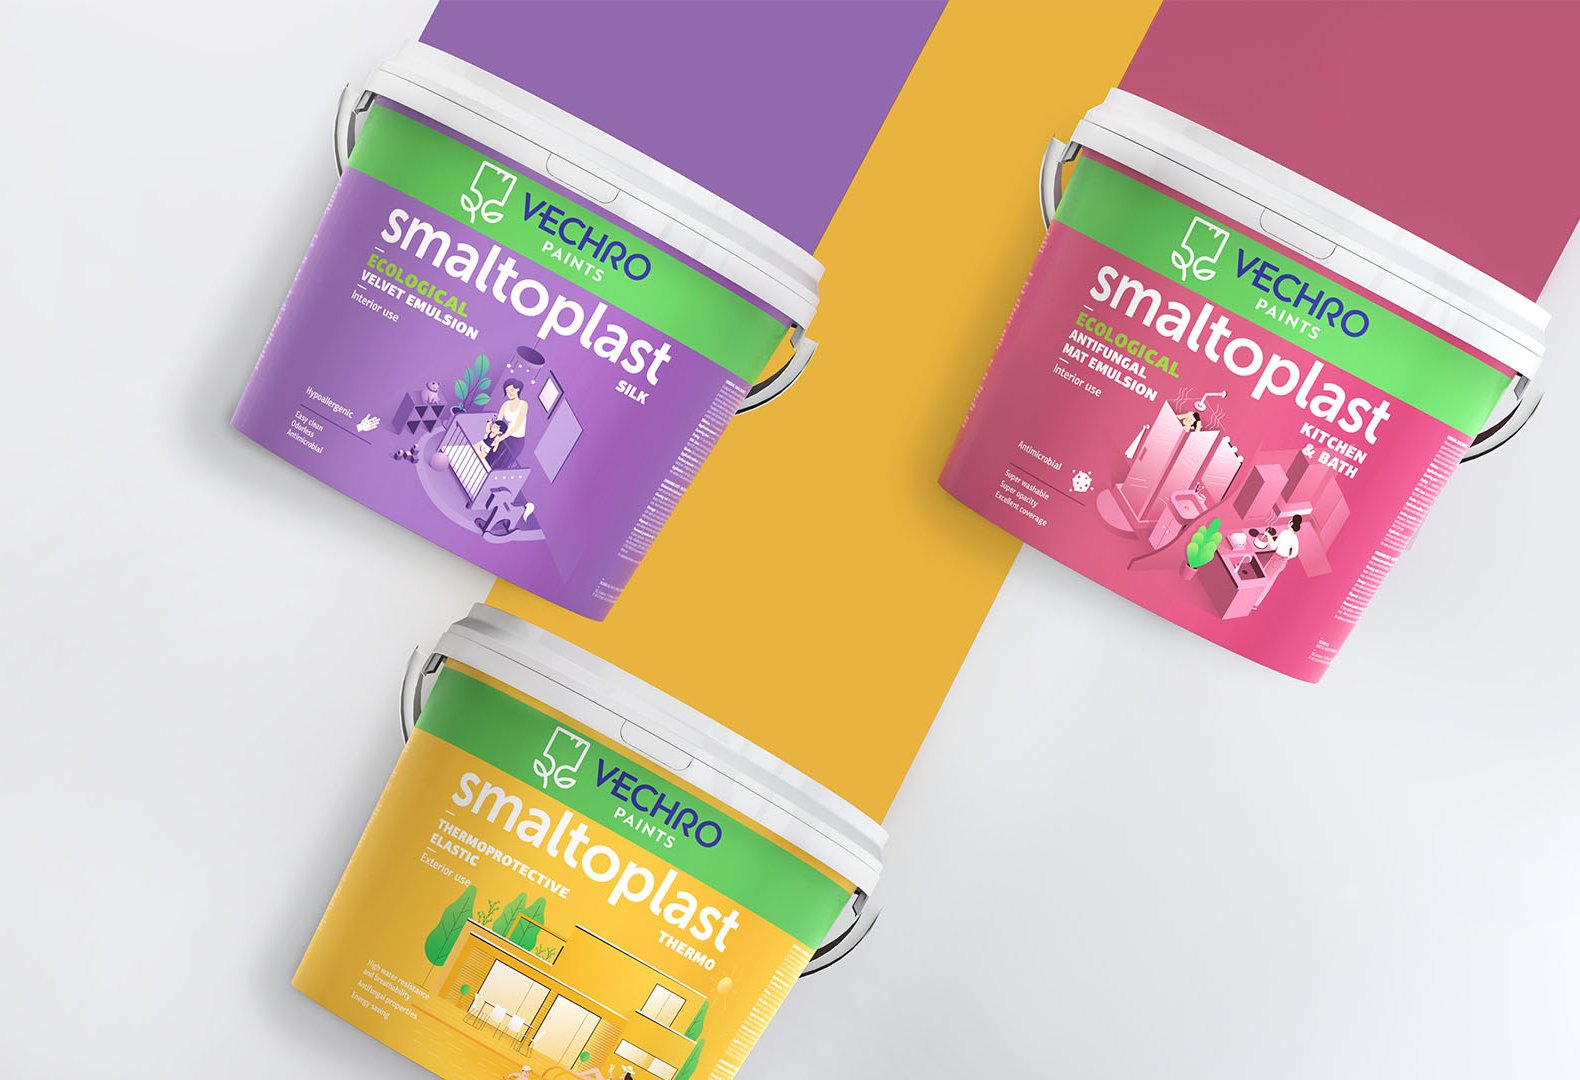 Three variants of Vechro Smaltoplast ecological paints redesigned packages